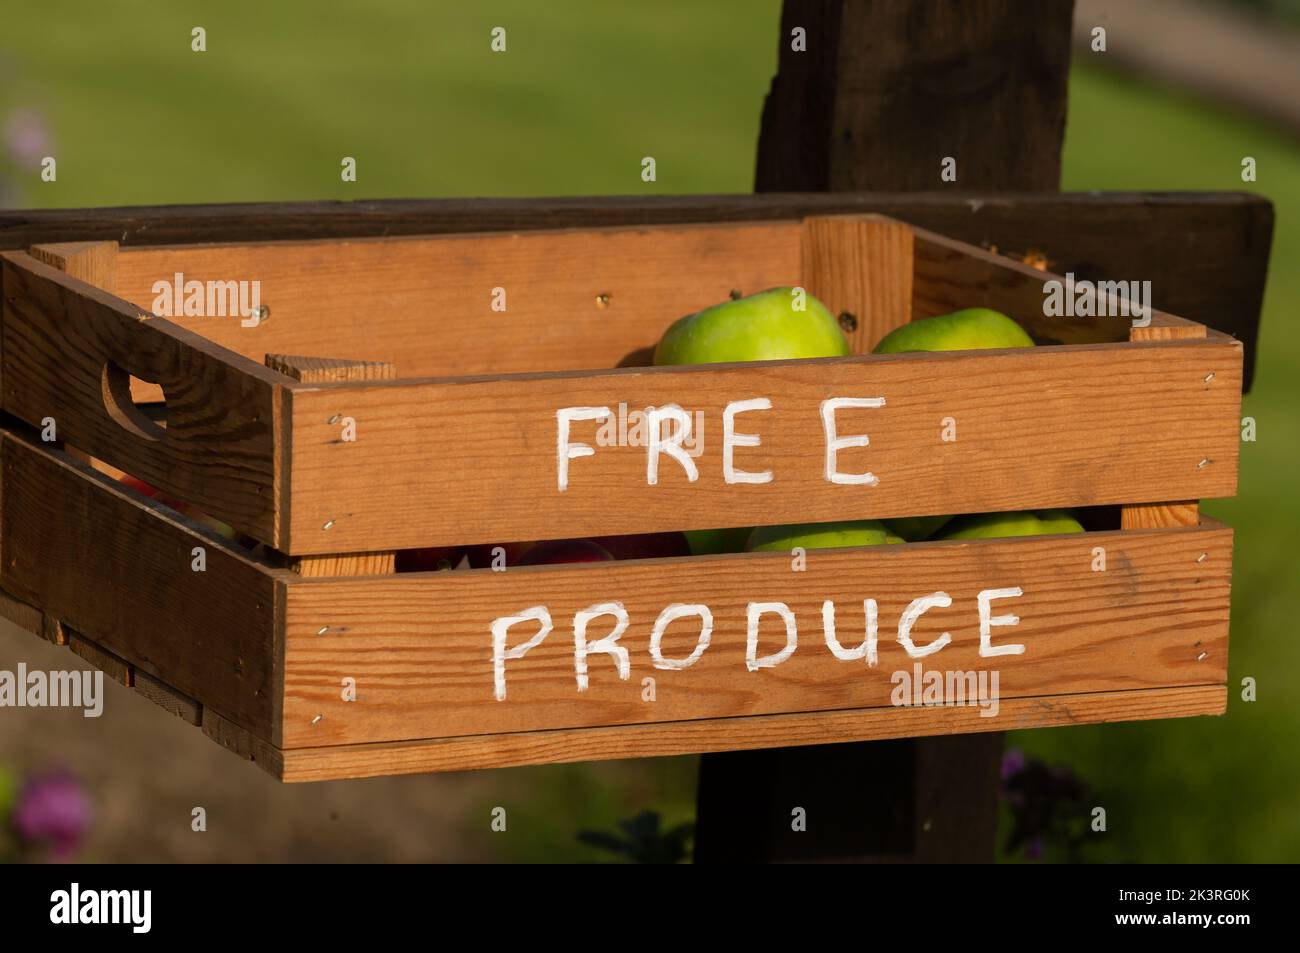 A wooden box attached to a fence in Yorkshire, England. The box contains surplus apples that are offered free to anyone passing. Stock Photo